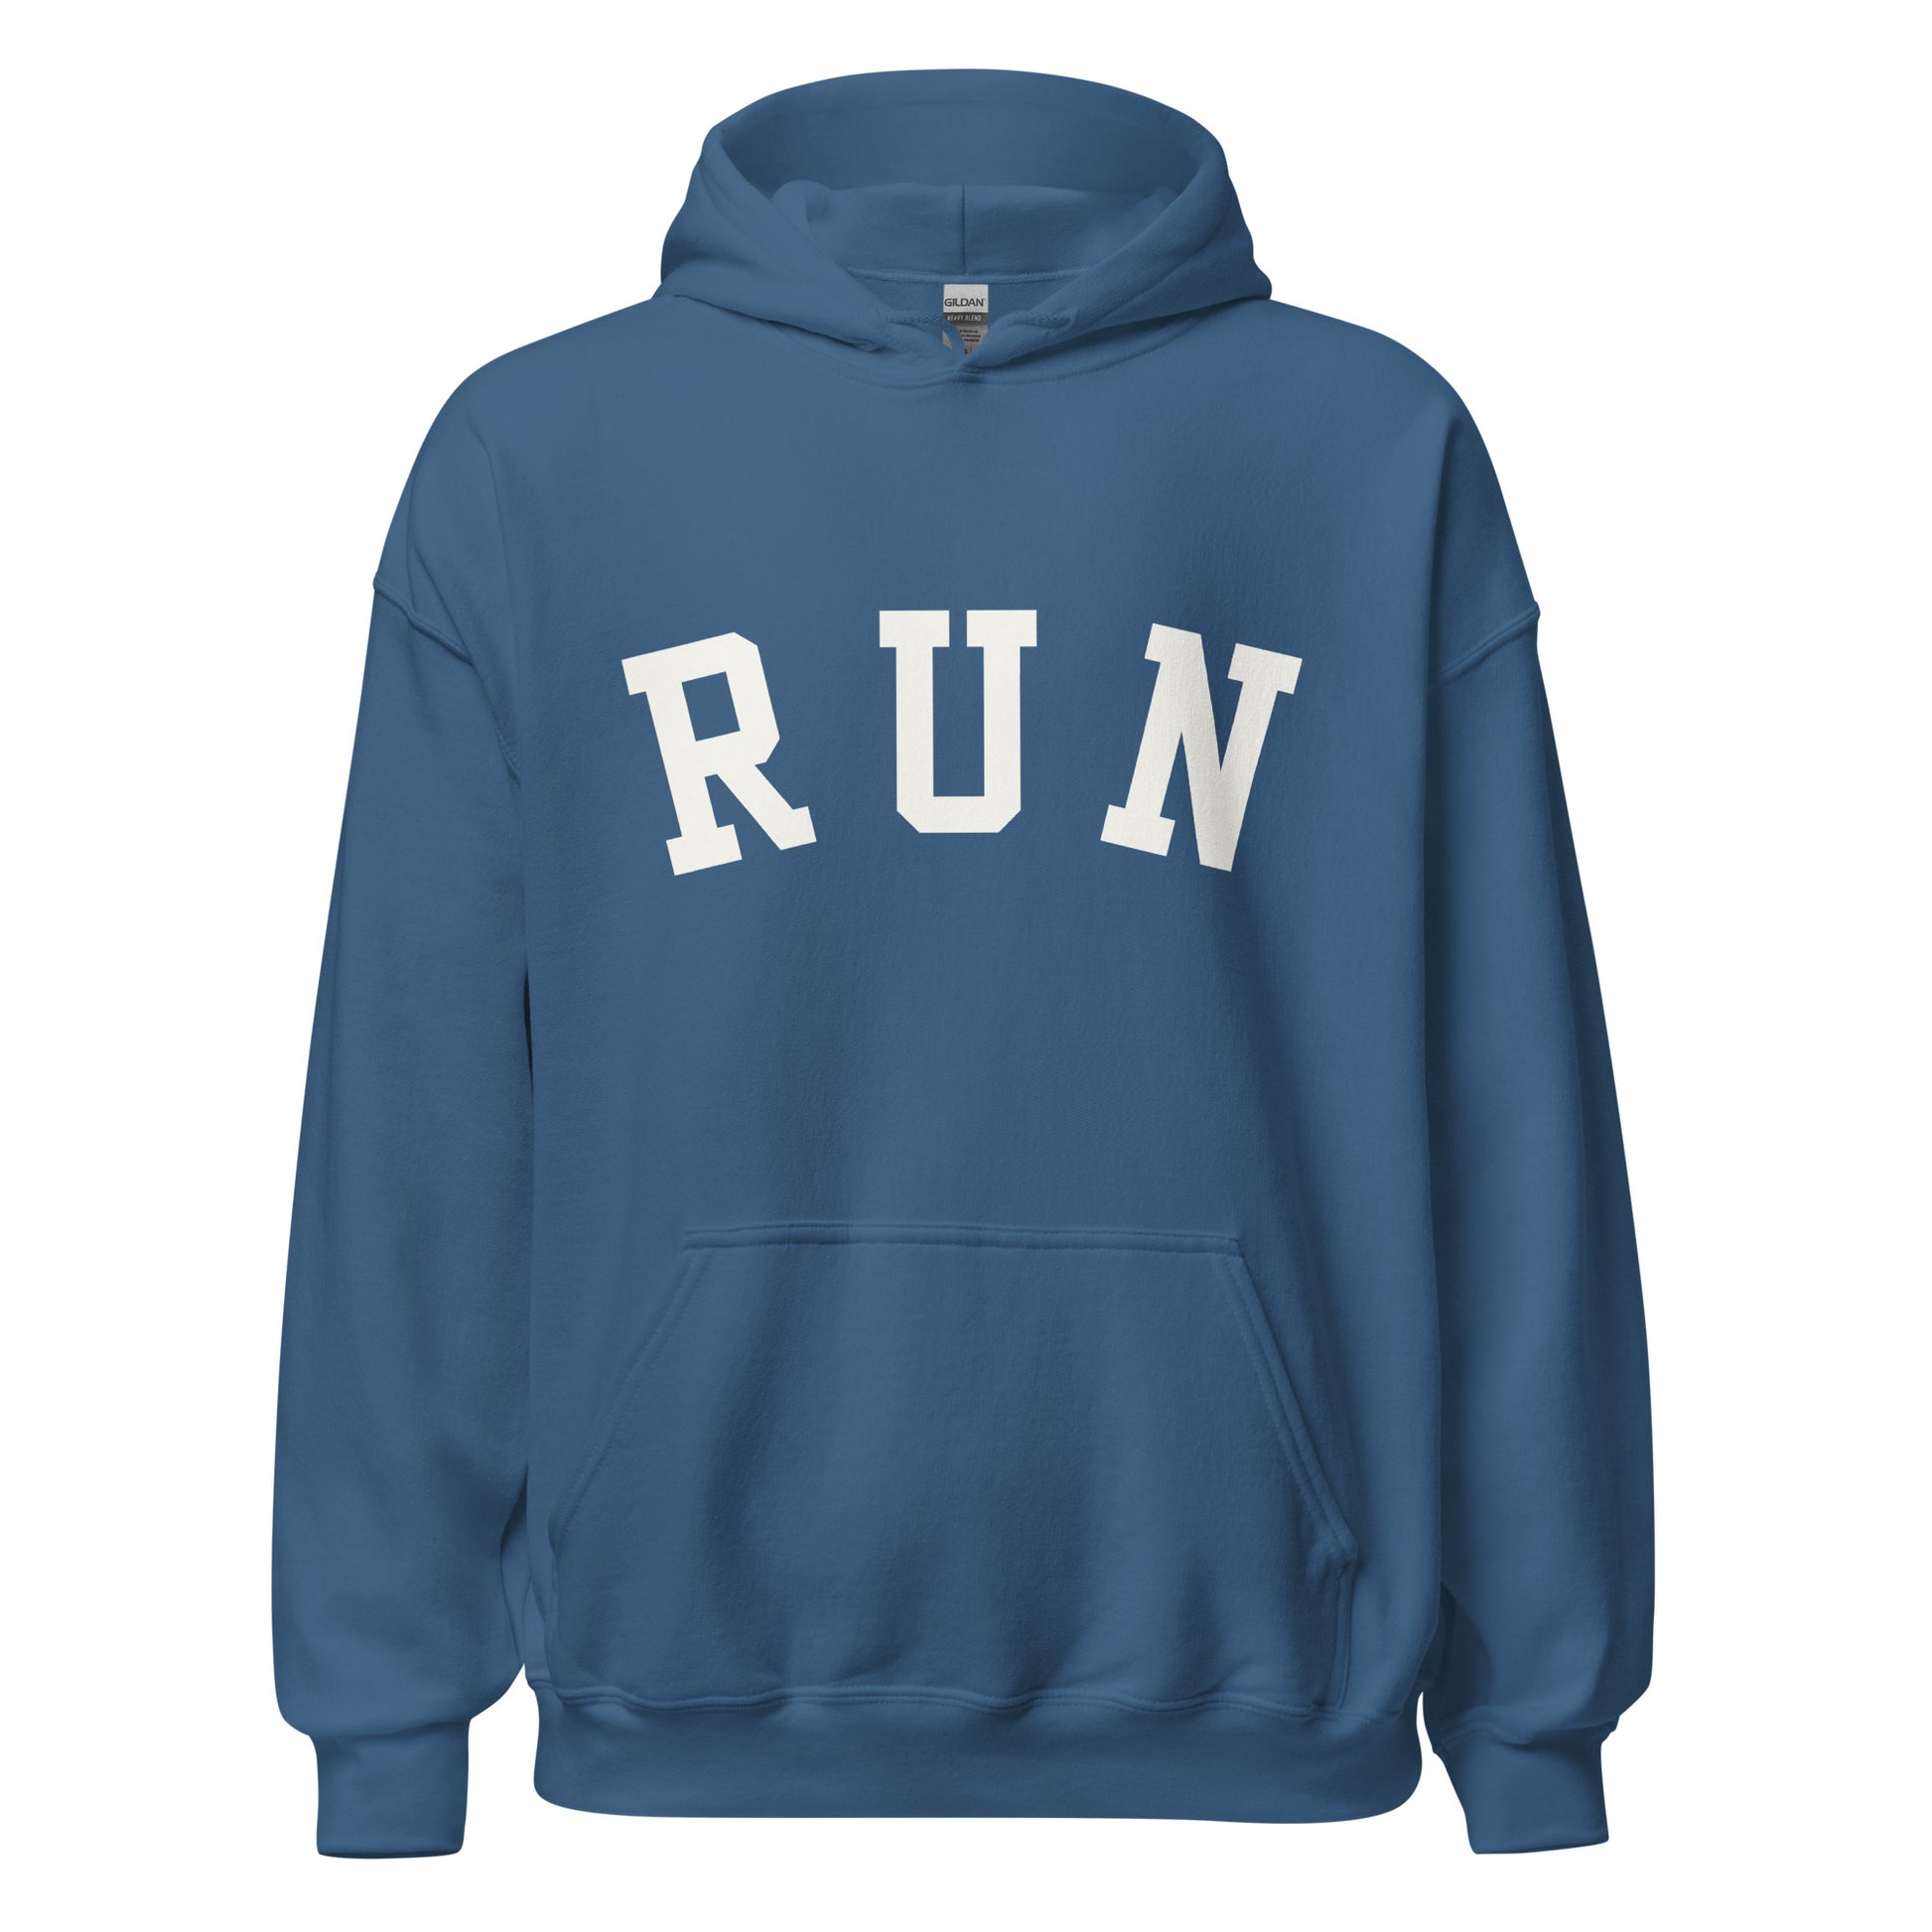 blue unisex hoodie with the word run across the chest in a white bold varsity style font